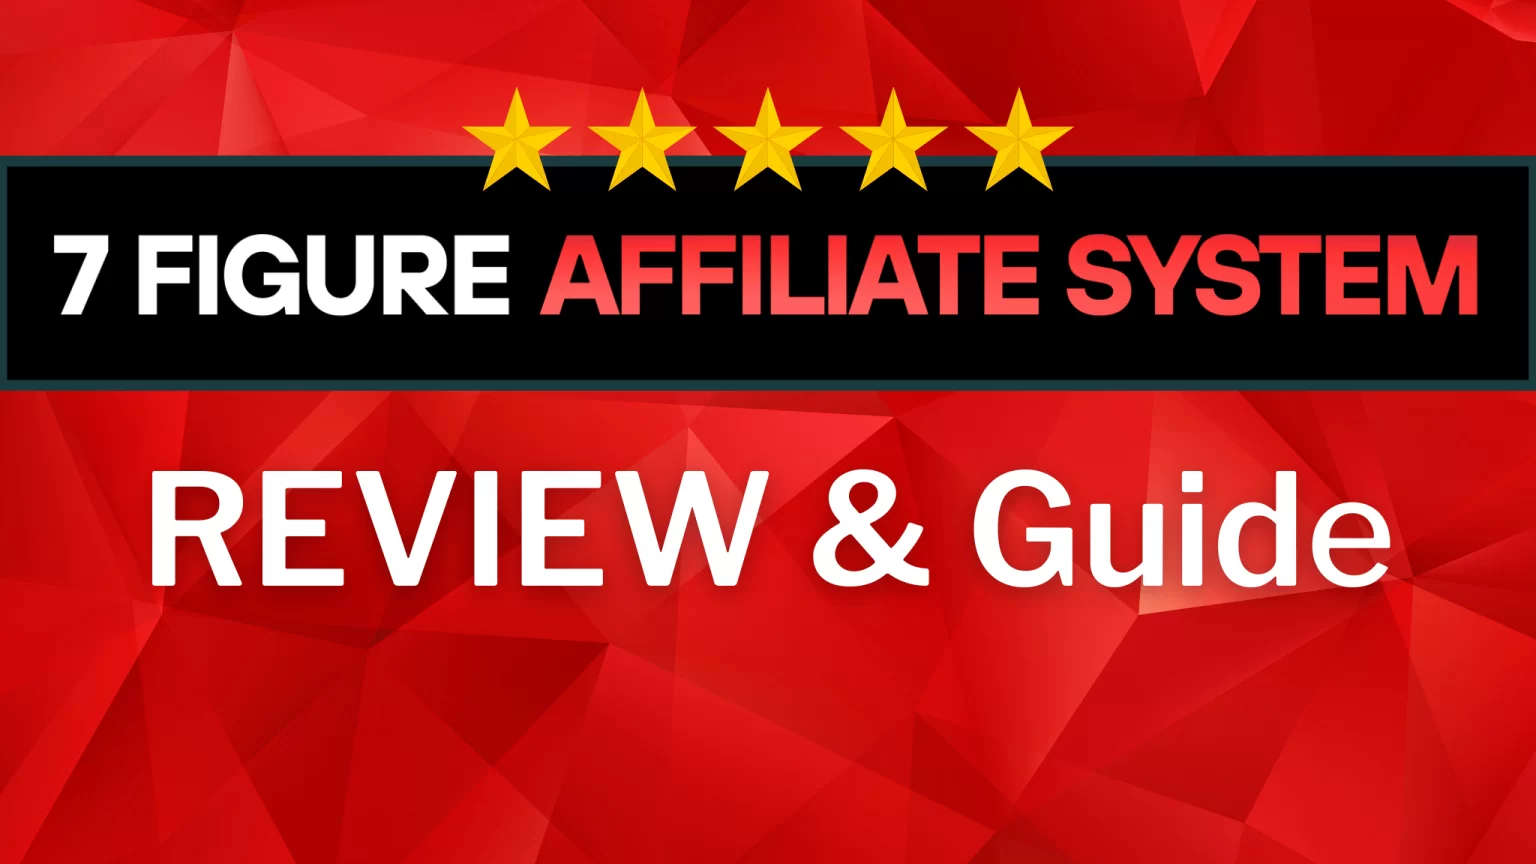 7 Figure Affiliate System Review